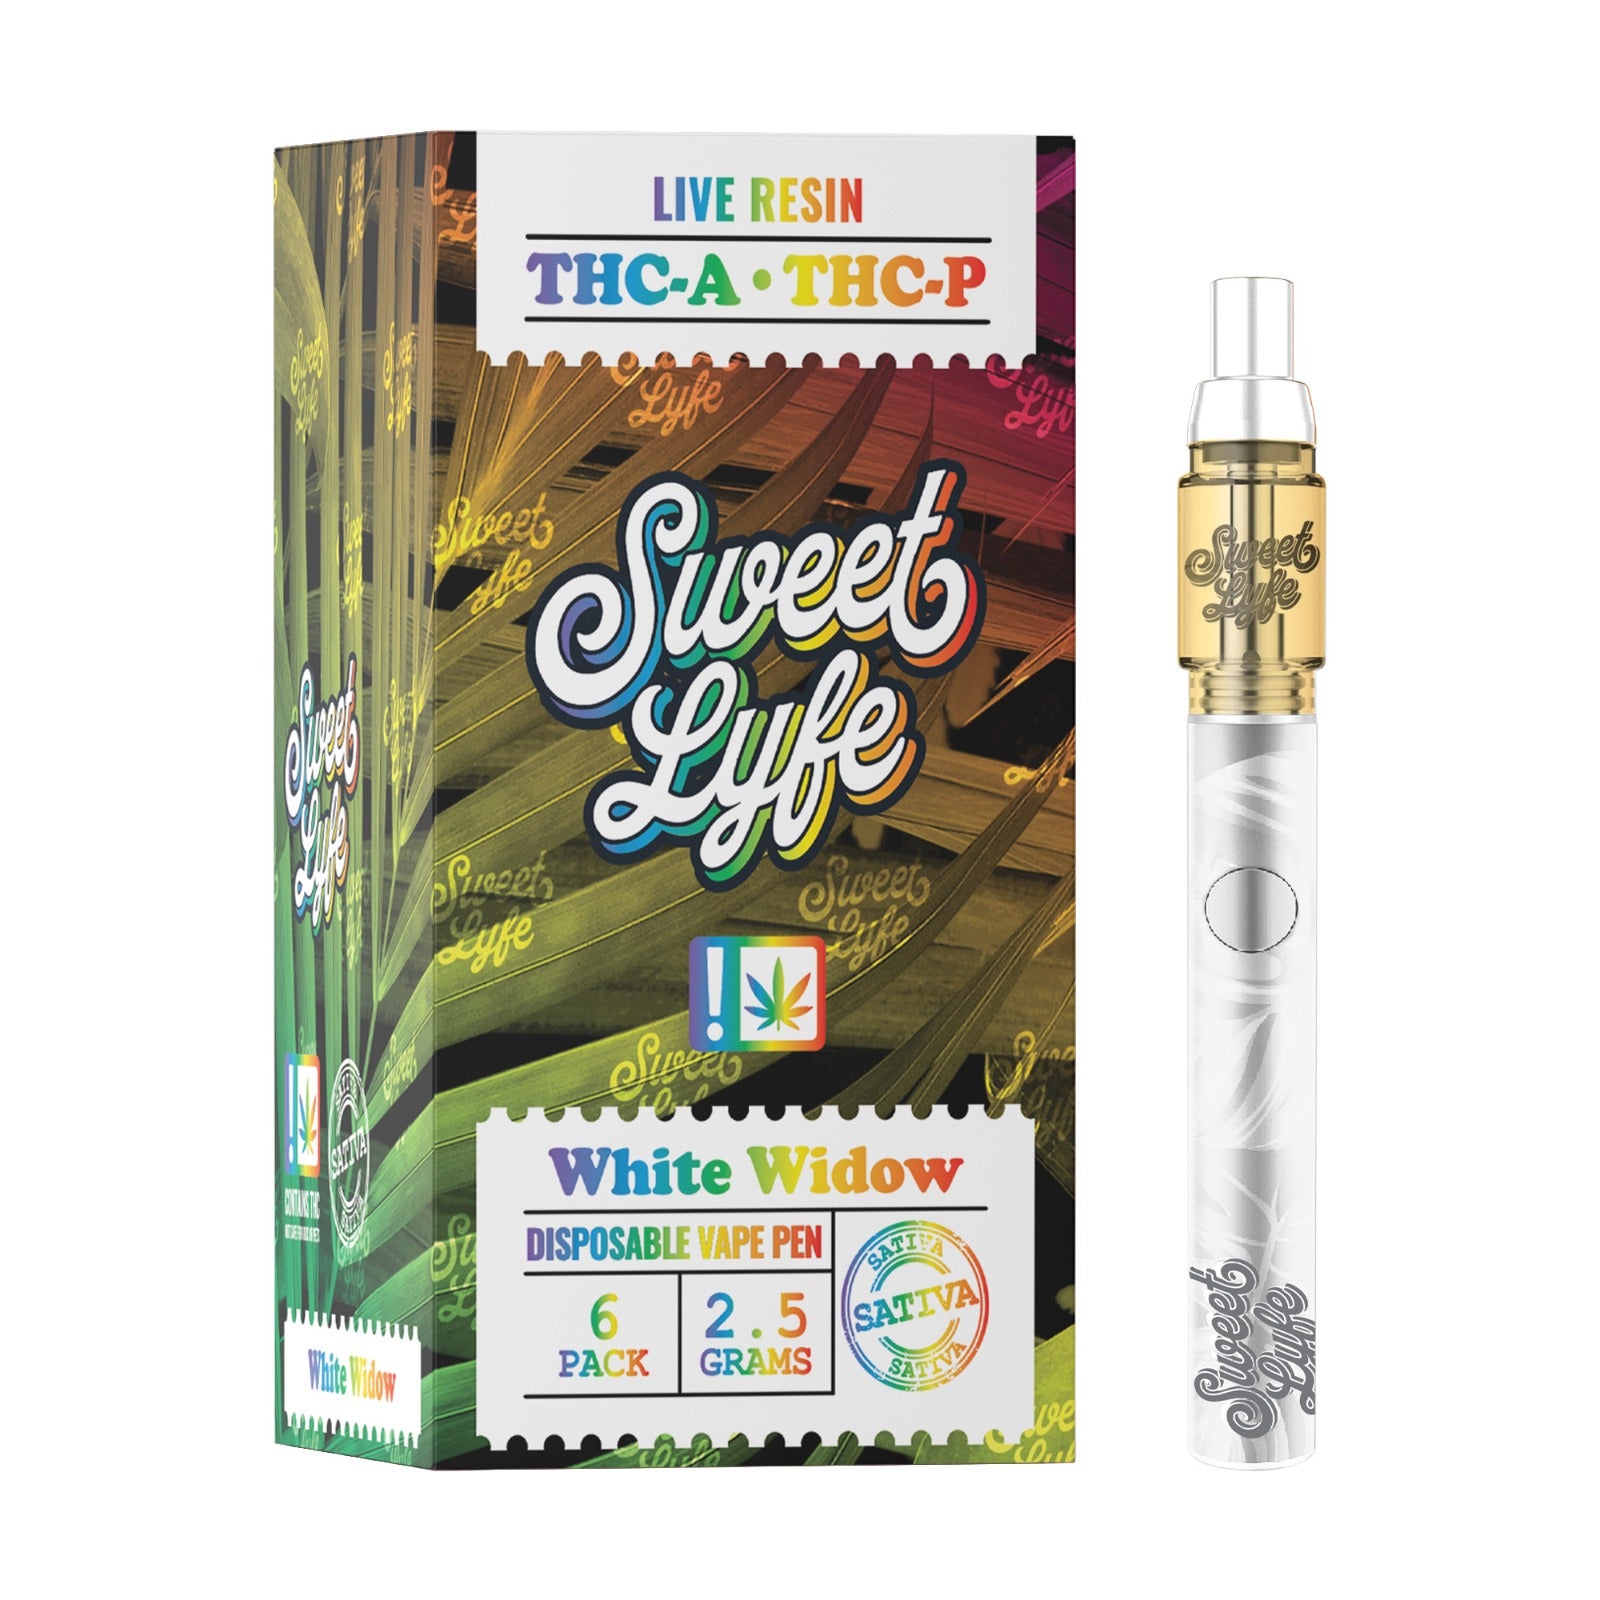 2.5ml Disposable Vape Pen Infused with Live Resin THCA & THCP - White Widow - Sativa